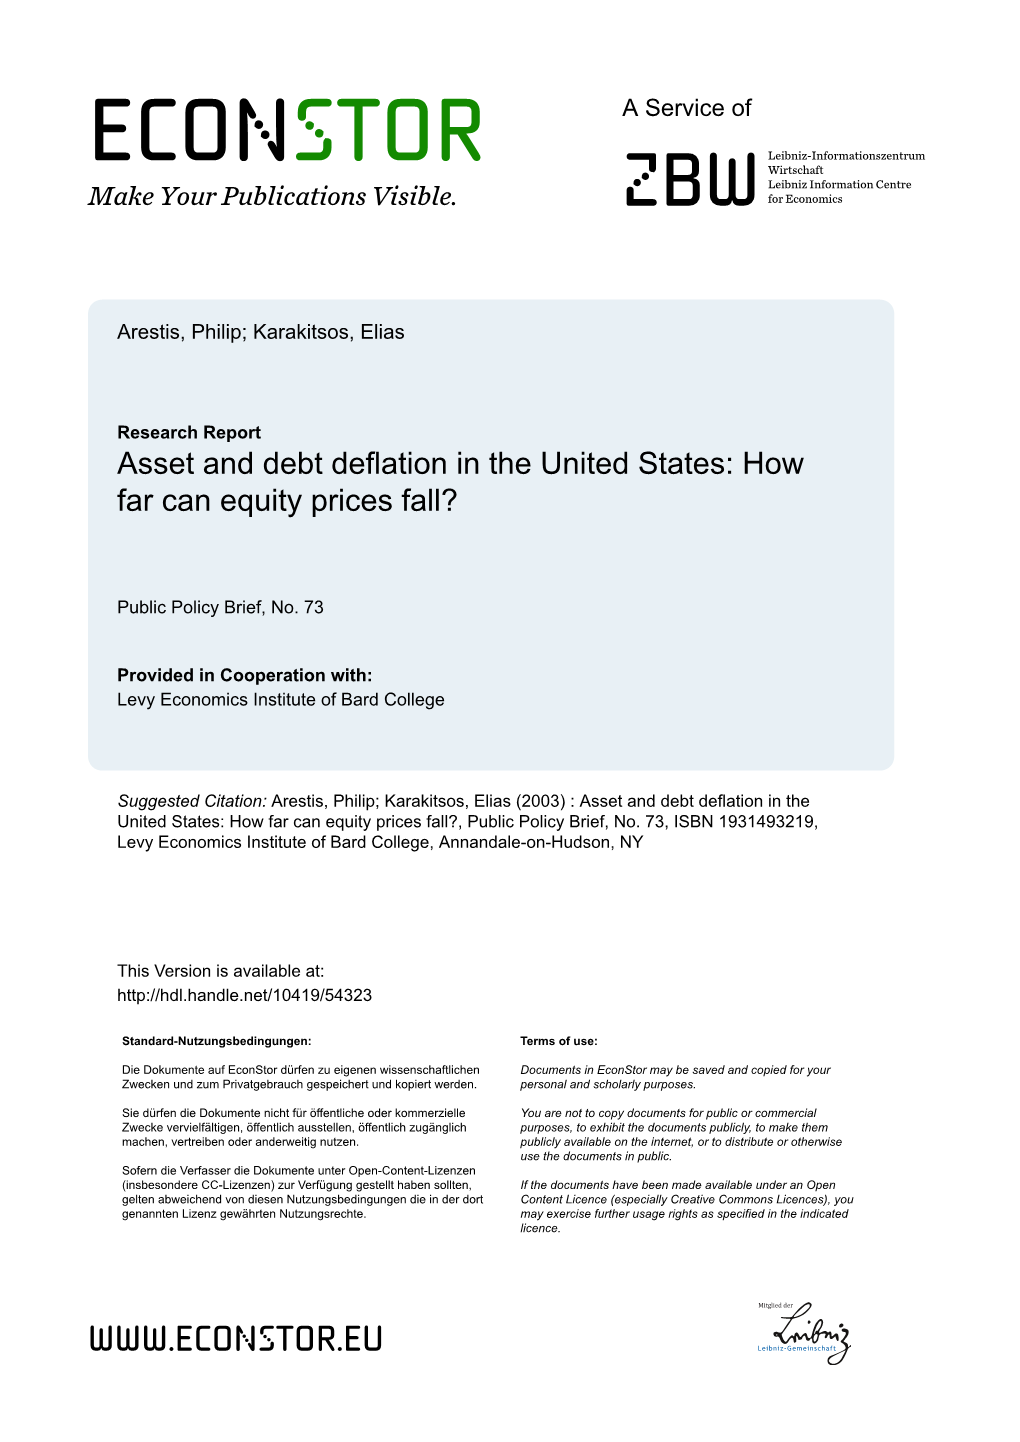 Asset and Debt Deflation in the United States: How Far Can Equity Prices Fall?